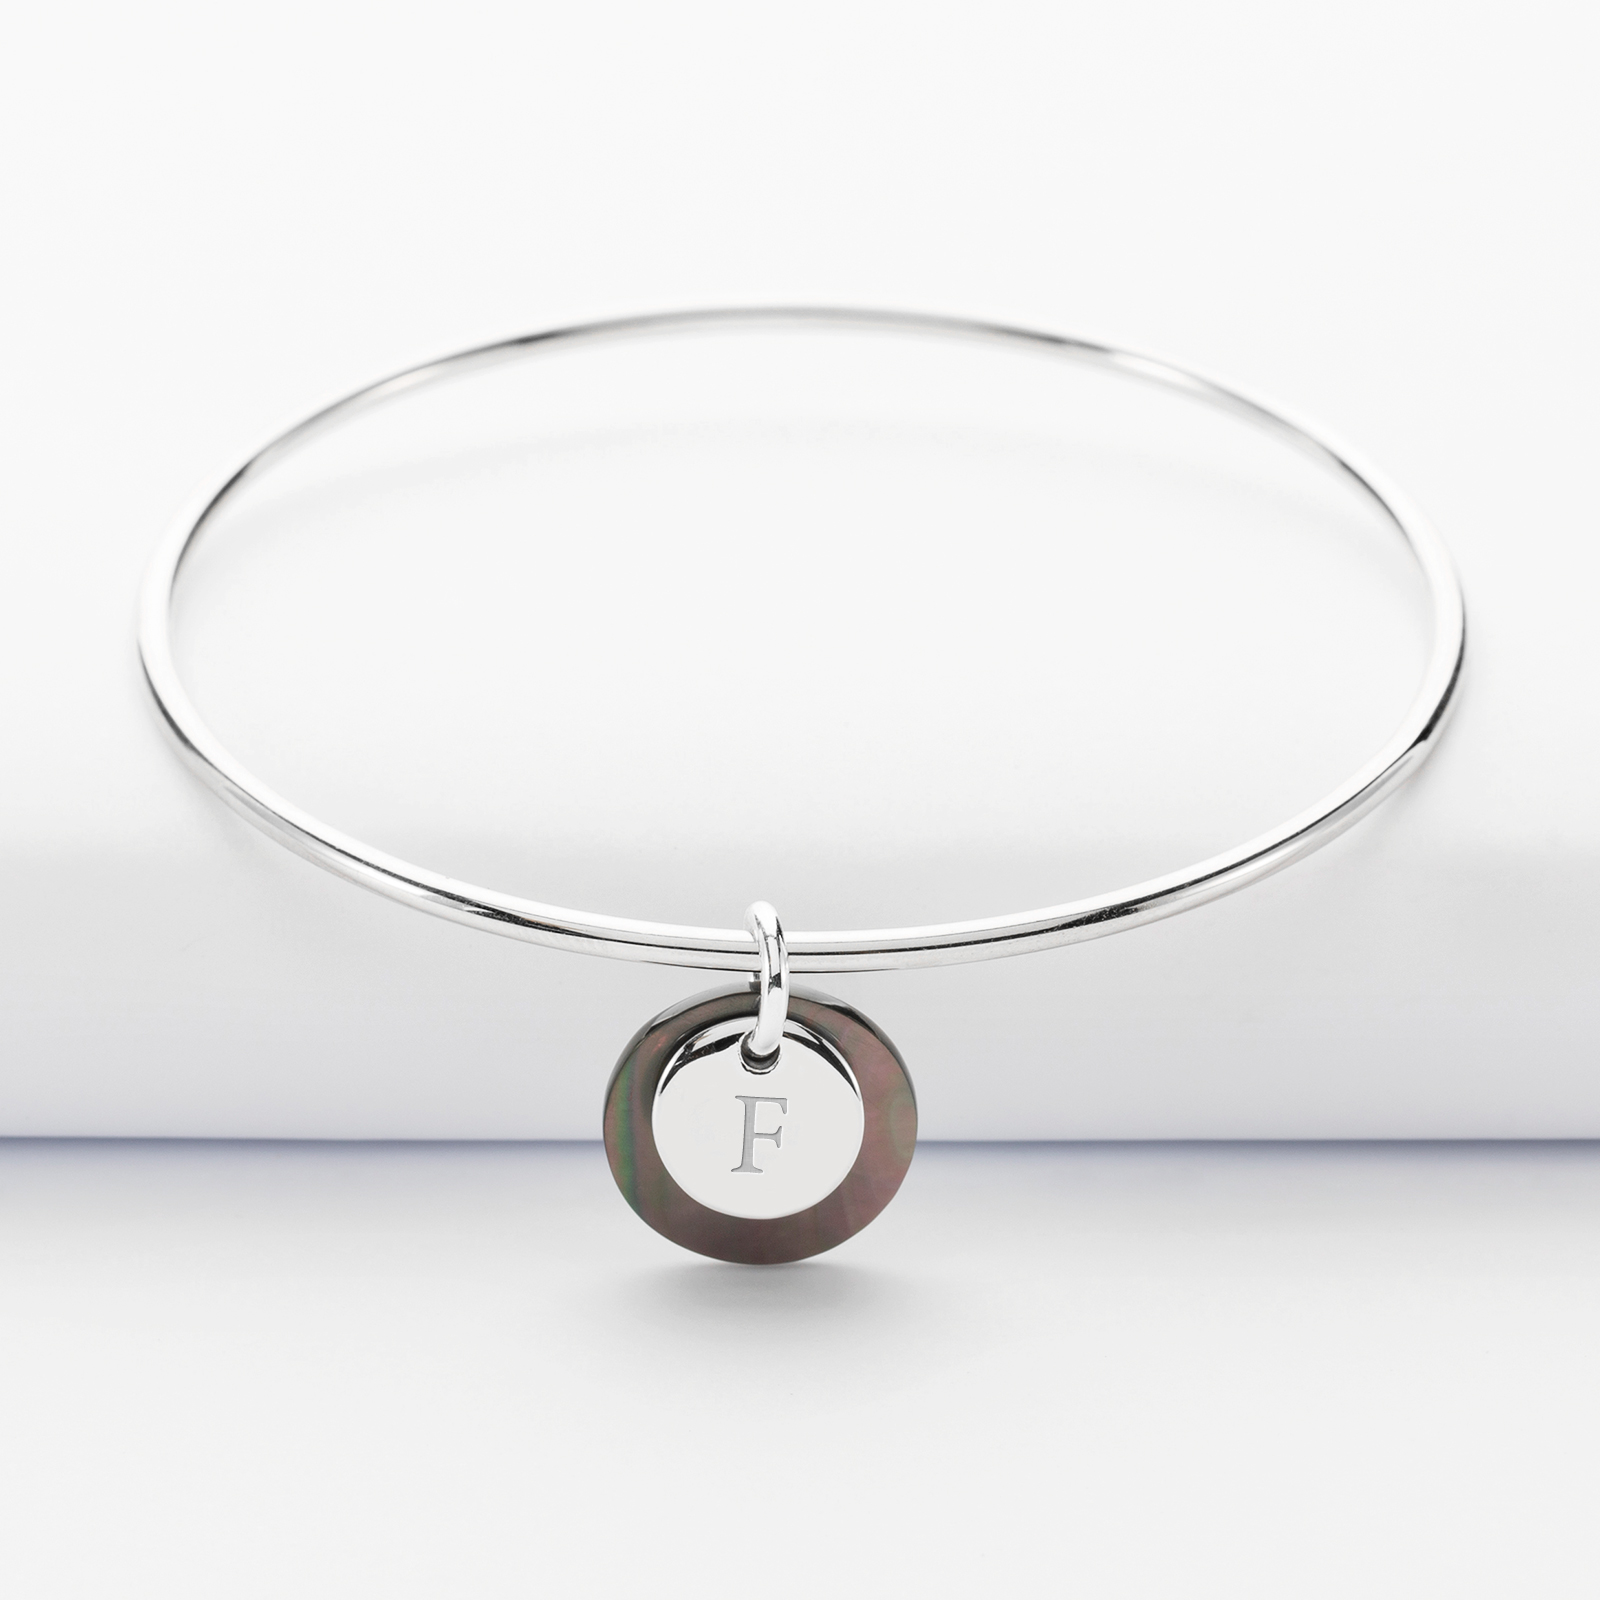 Personalised silver engraved 10 mm bangle and mother of pearl 15 mm charm - 1